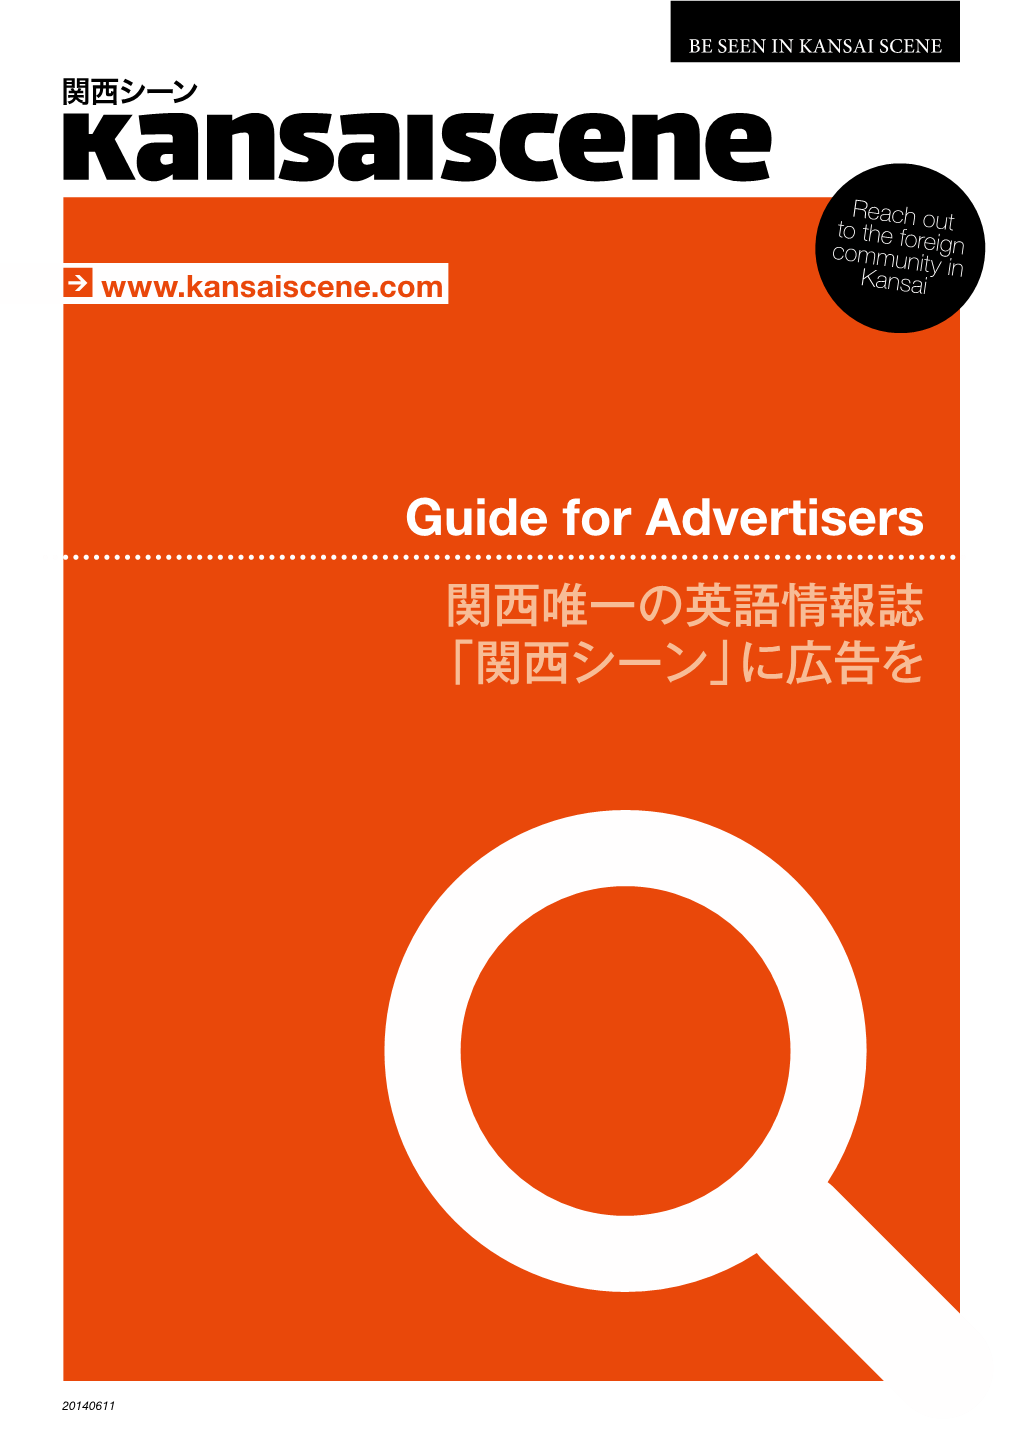 Guide for Advertisers 関西唯一の英語情報誌 「関西シーン」に広告を